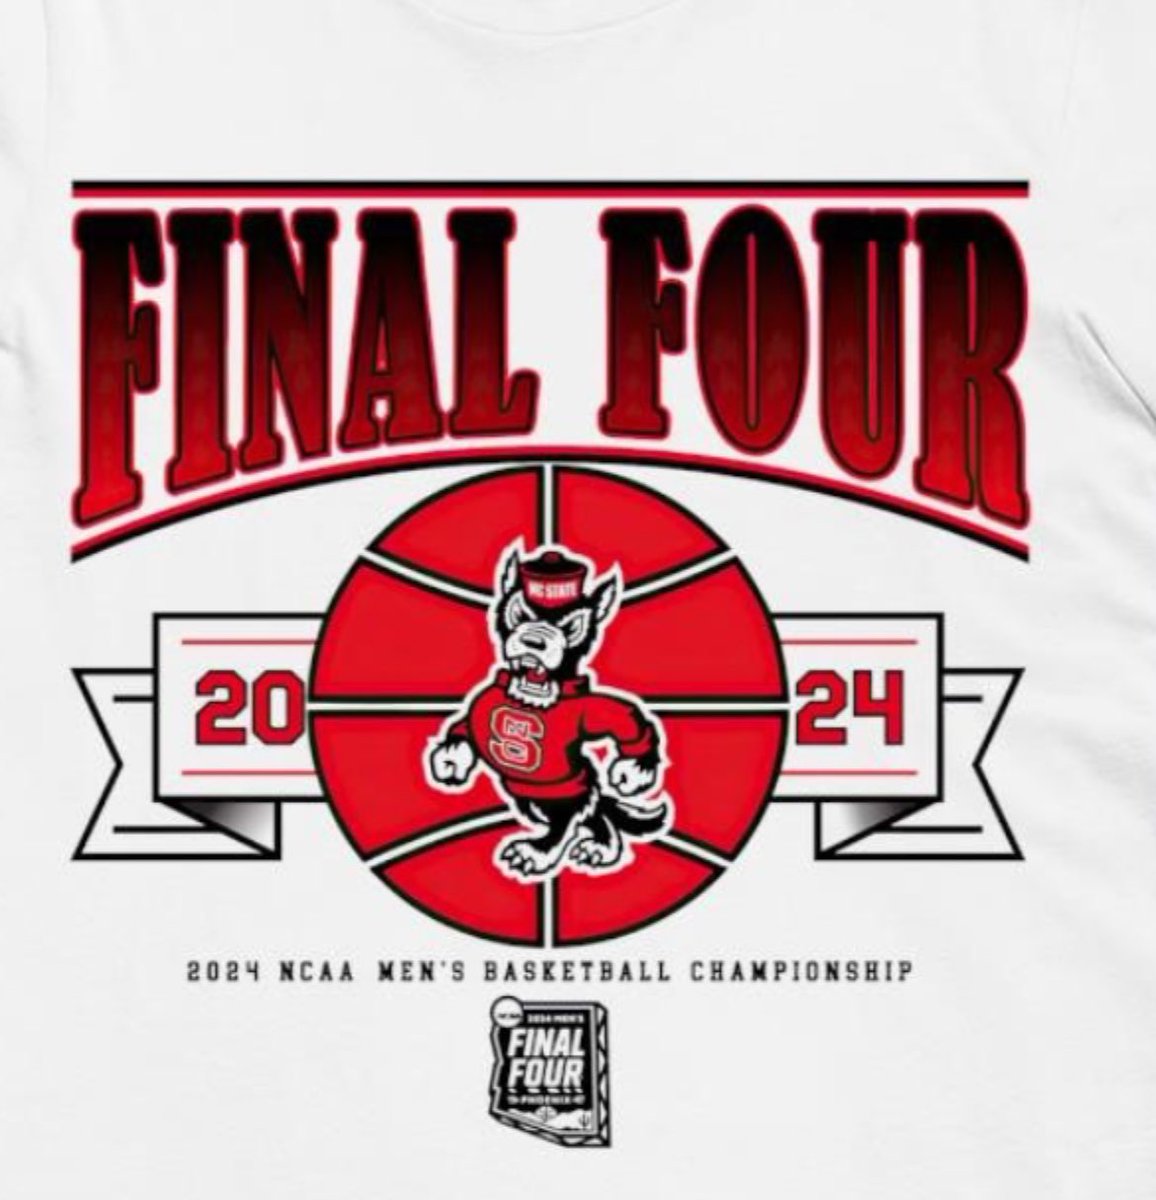 Go N.C. State Wolfpack in Final Four!! TONIGHT, Show Purdue who you are!